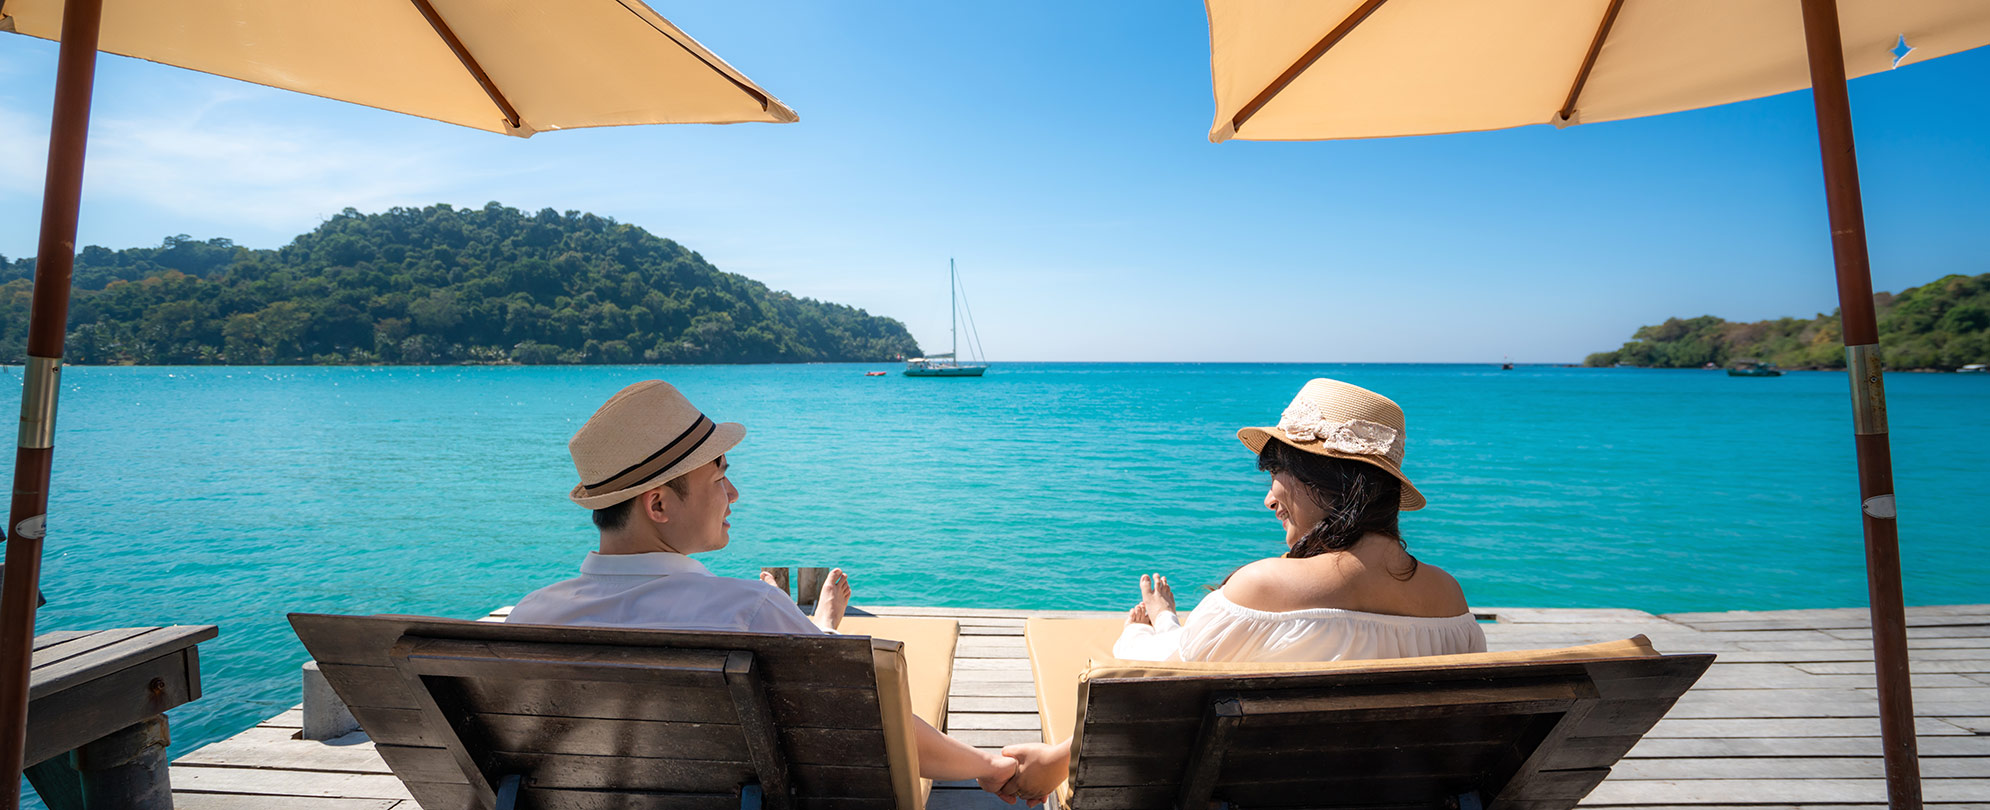 A couple looking at each other while relaxing under umbrellas by the ocean on a tropical vacation.